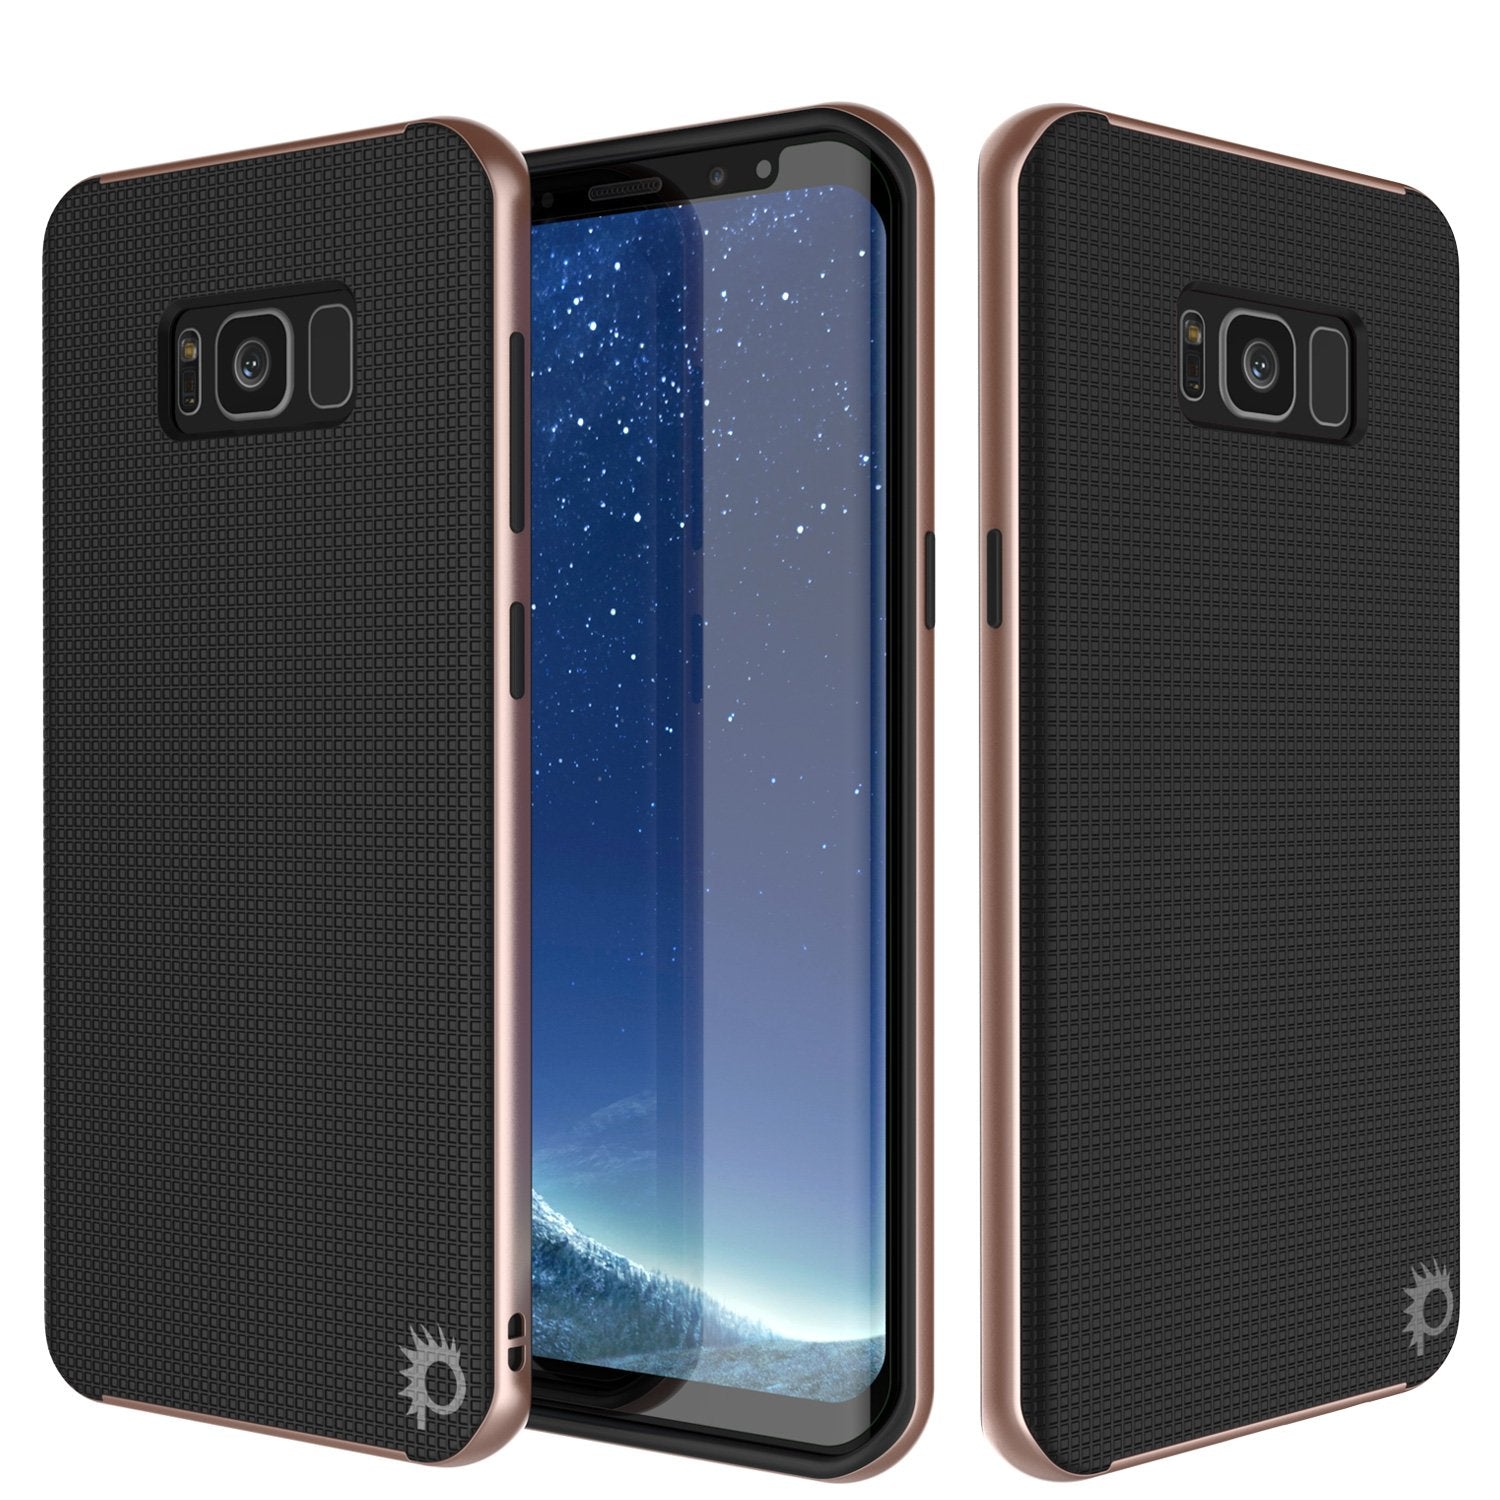 Galaxy S8 Case, PunkCase [Stealth Series] Hybrid 3-Piece Shockproof Dual Layer Cover [Non-Slip] [Soft TPU + PC Bumper] with PUNKSHIELD Screen Protector for Samsung S8 Edge [Rose Gold]